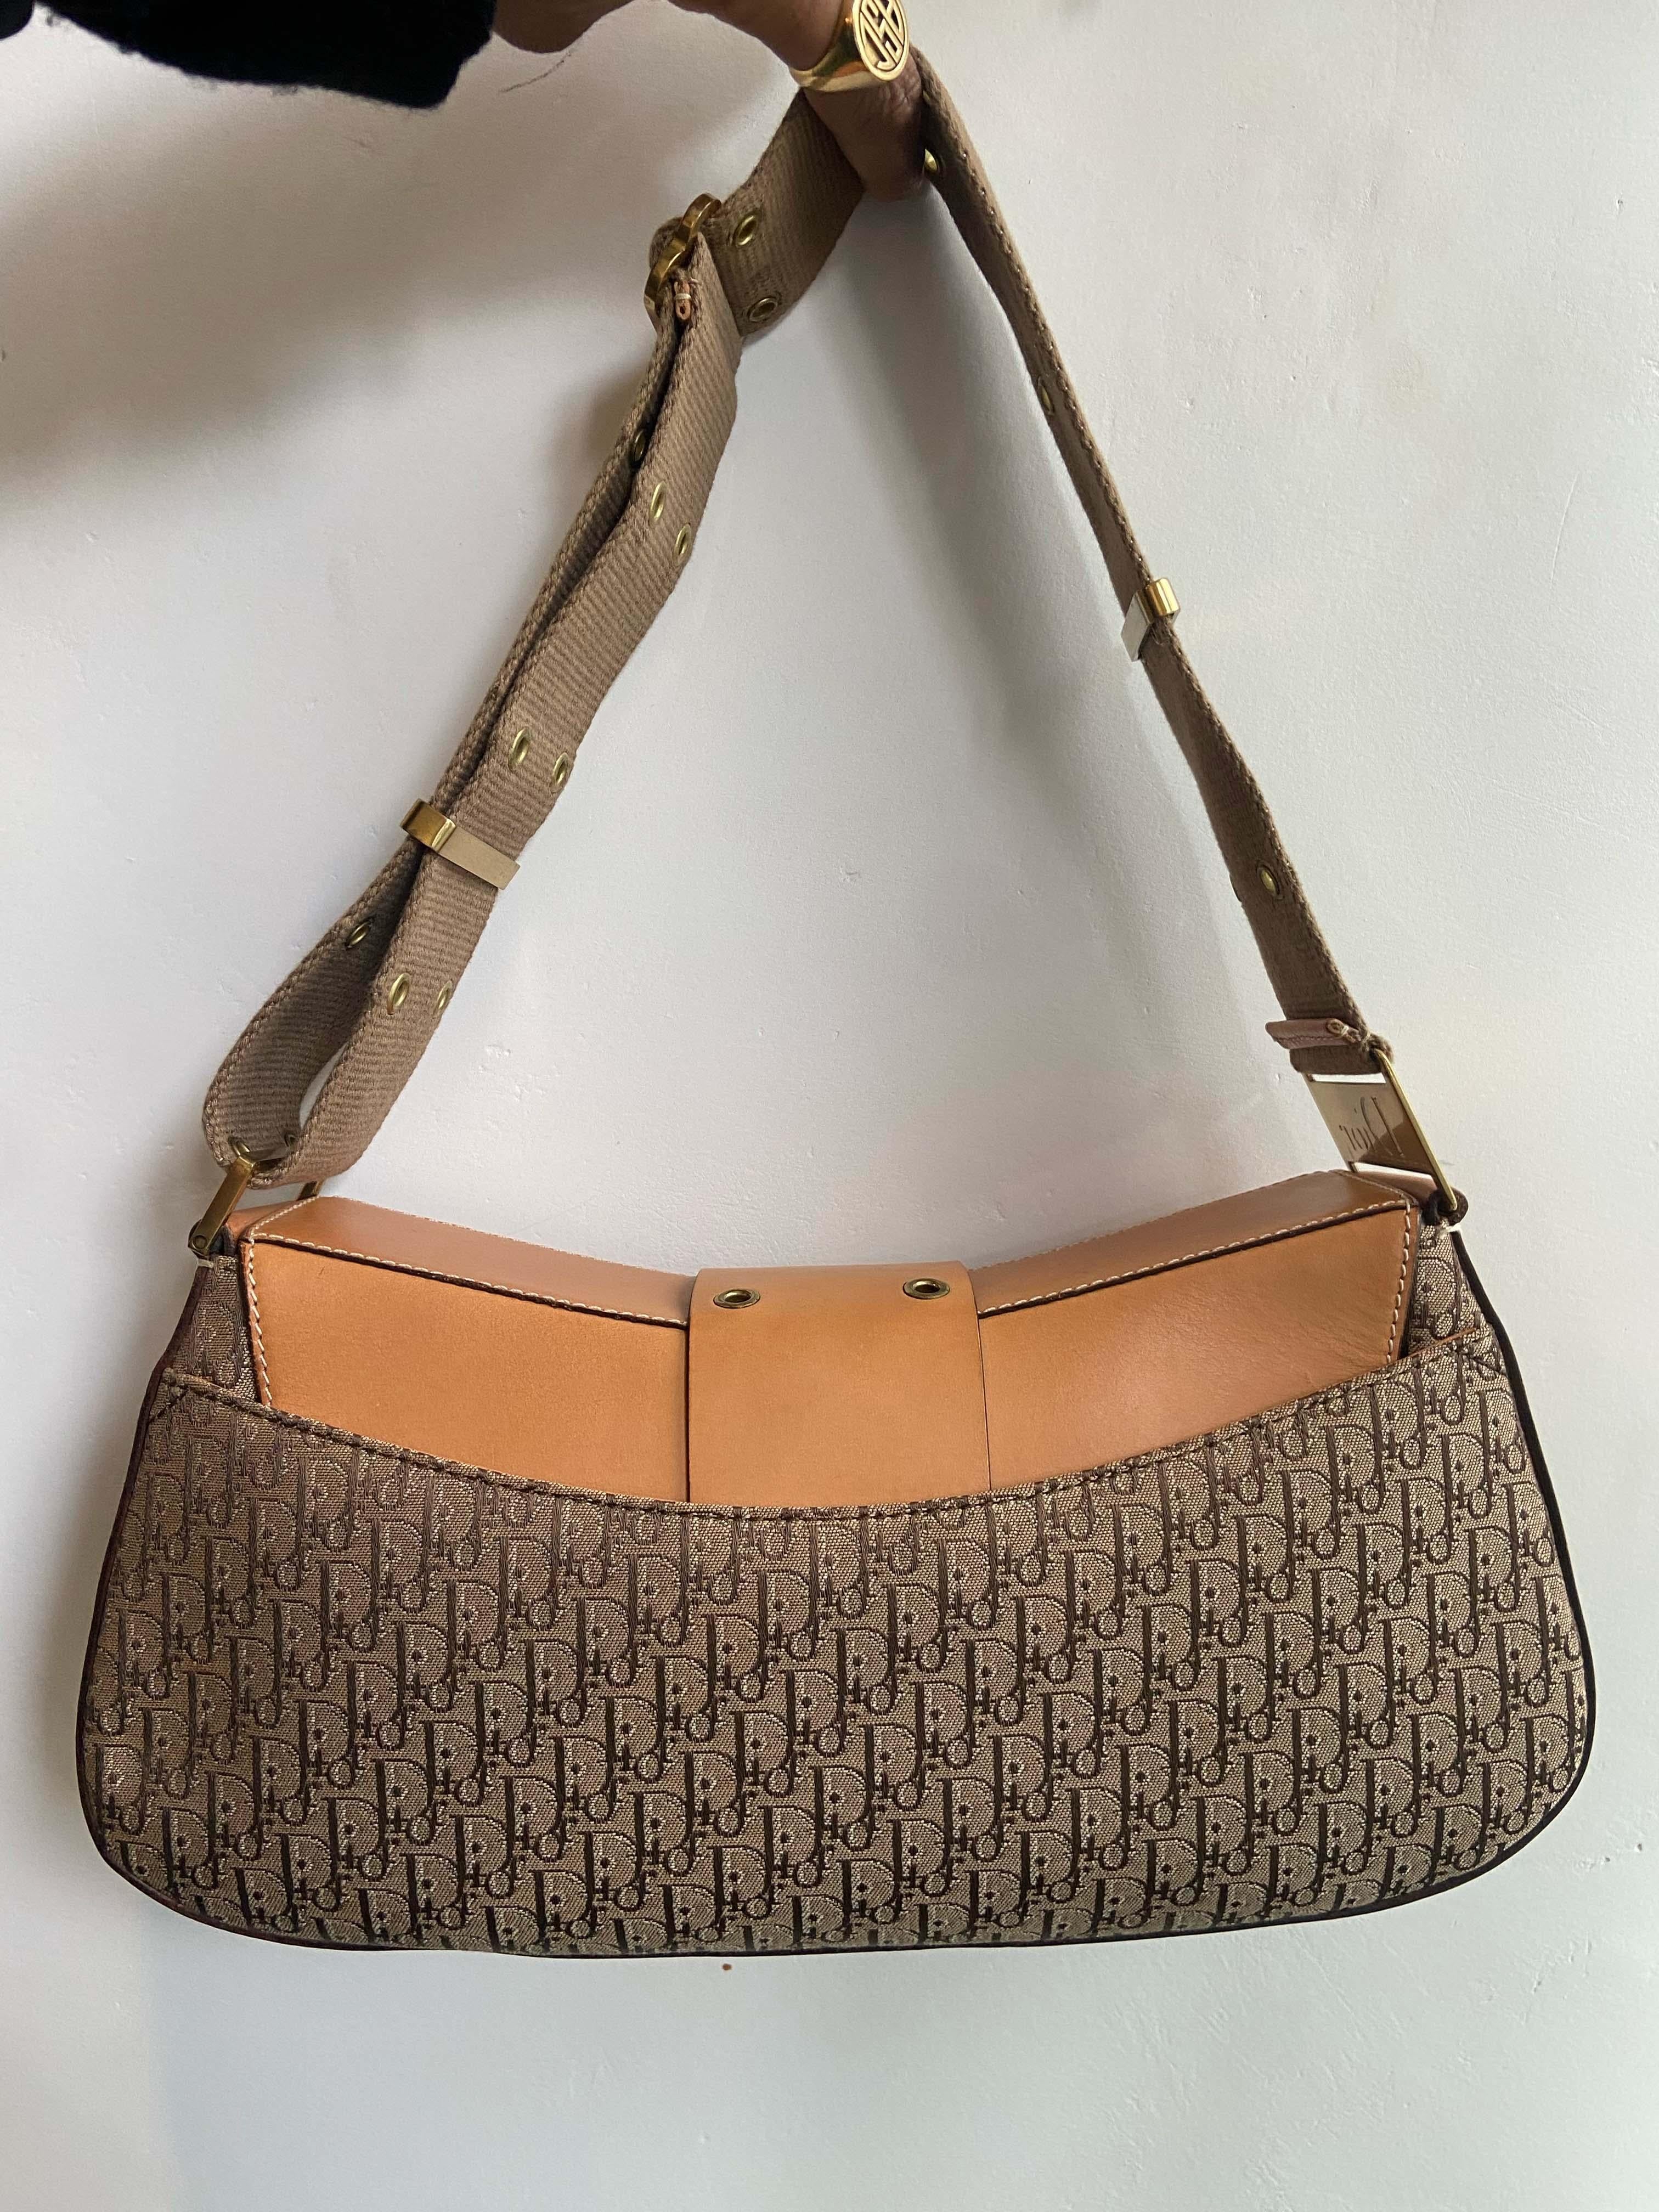 Christian Dior by John Galliano 2003 Columbus monogram handbag. Features Dior hardware, structured shape, canvas body, cowhide leather features, inside zip back pocket and adjustable shoulder strap. In good vintage condition.

Brand: Christian